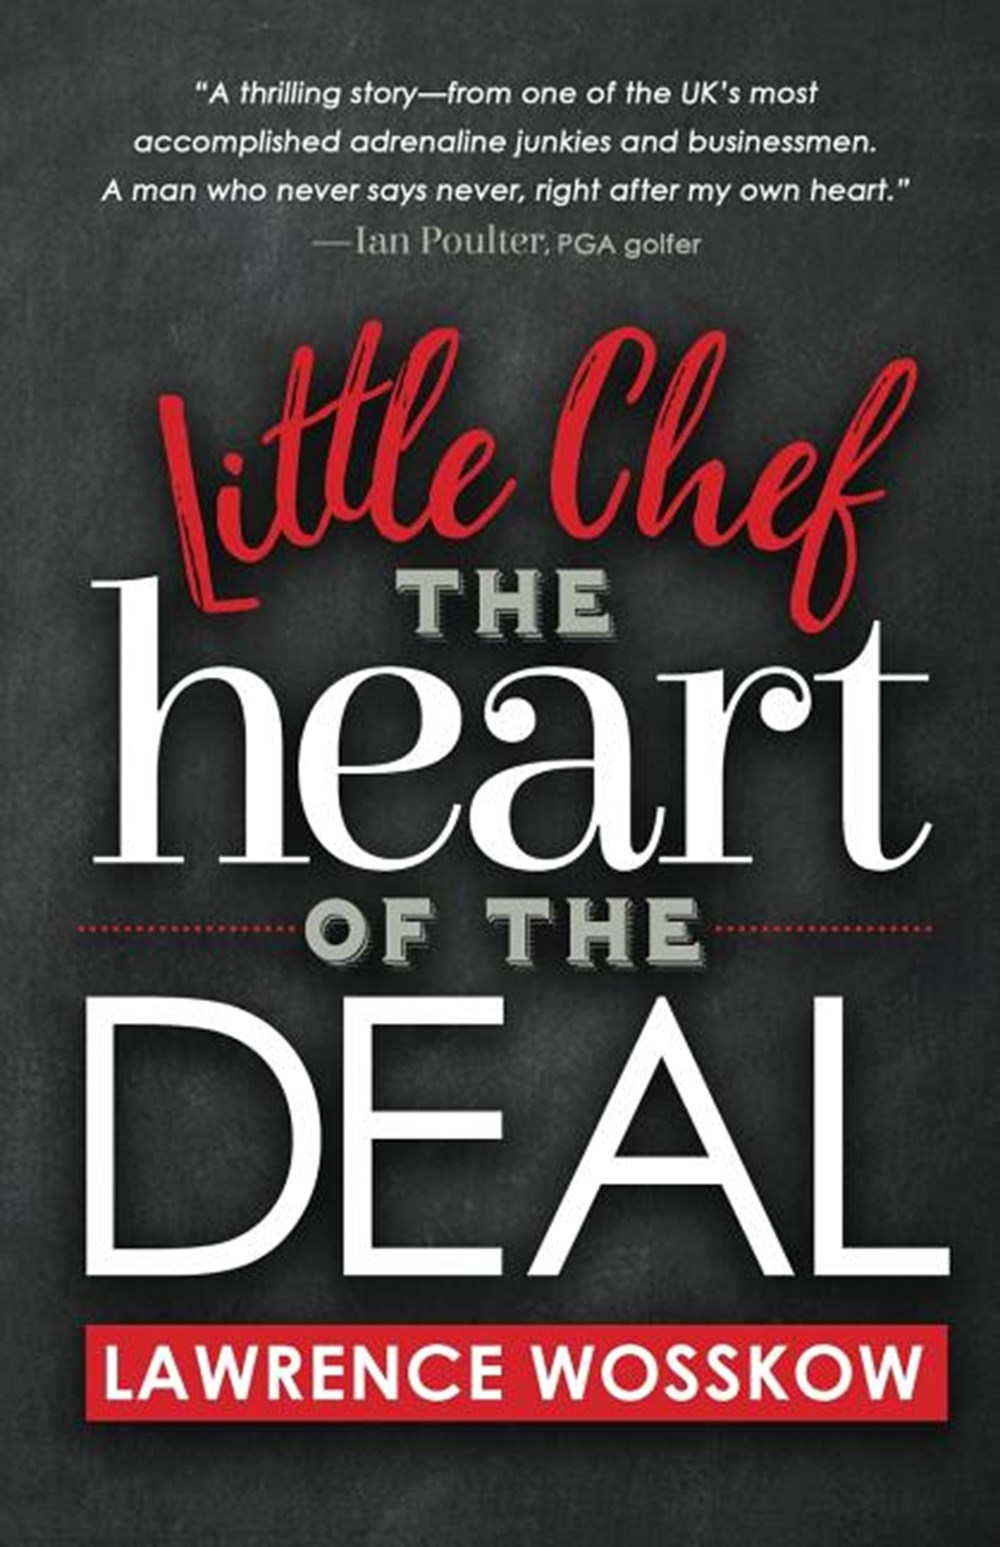 Little Chef The Heart of The Deal